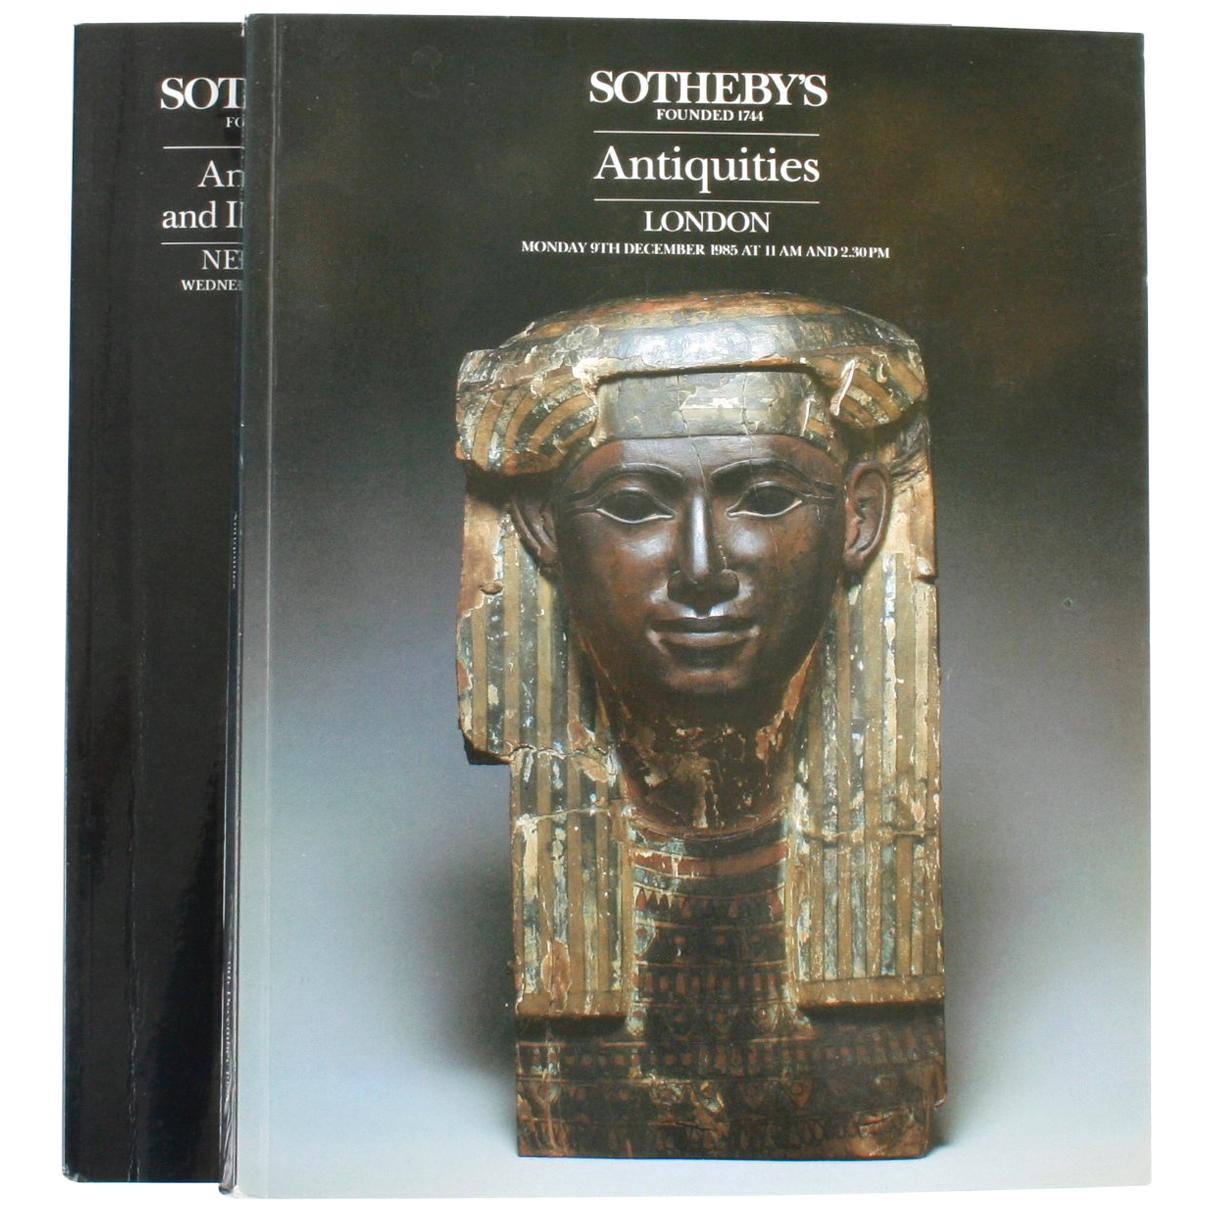 Pair of Sotheby's Catalogues on Antiquities and Islamic Art For Sale